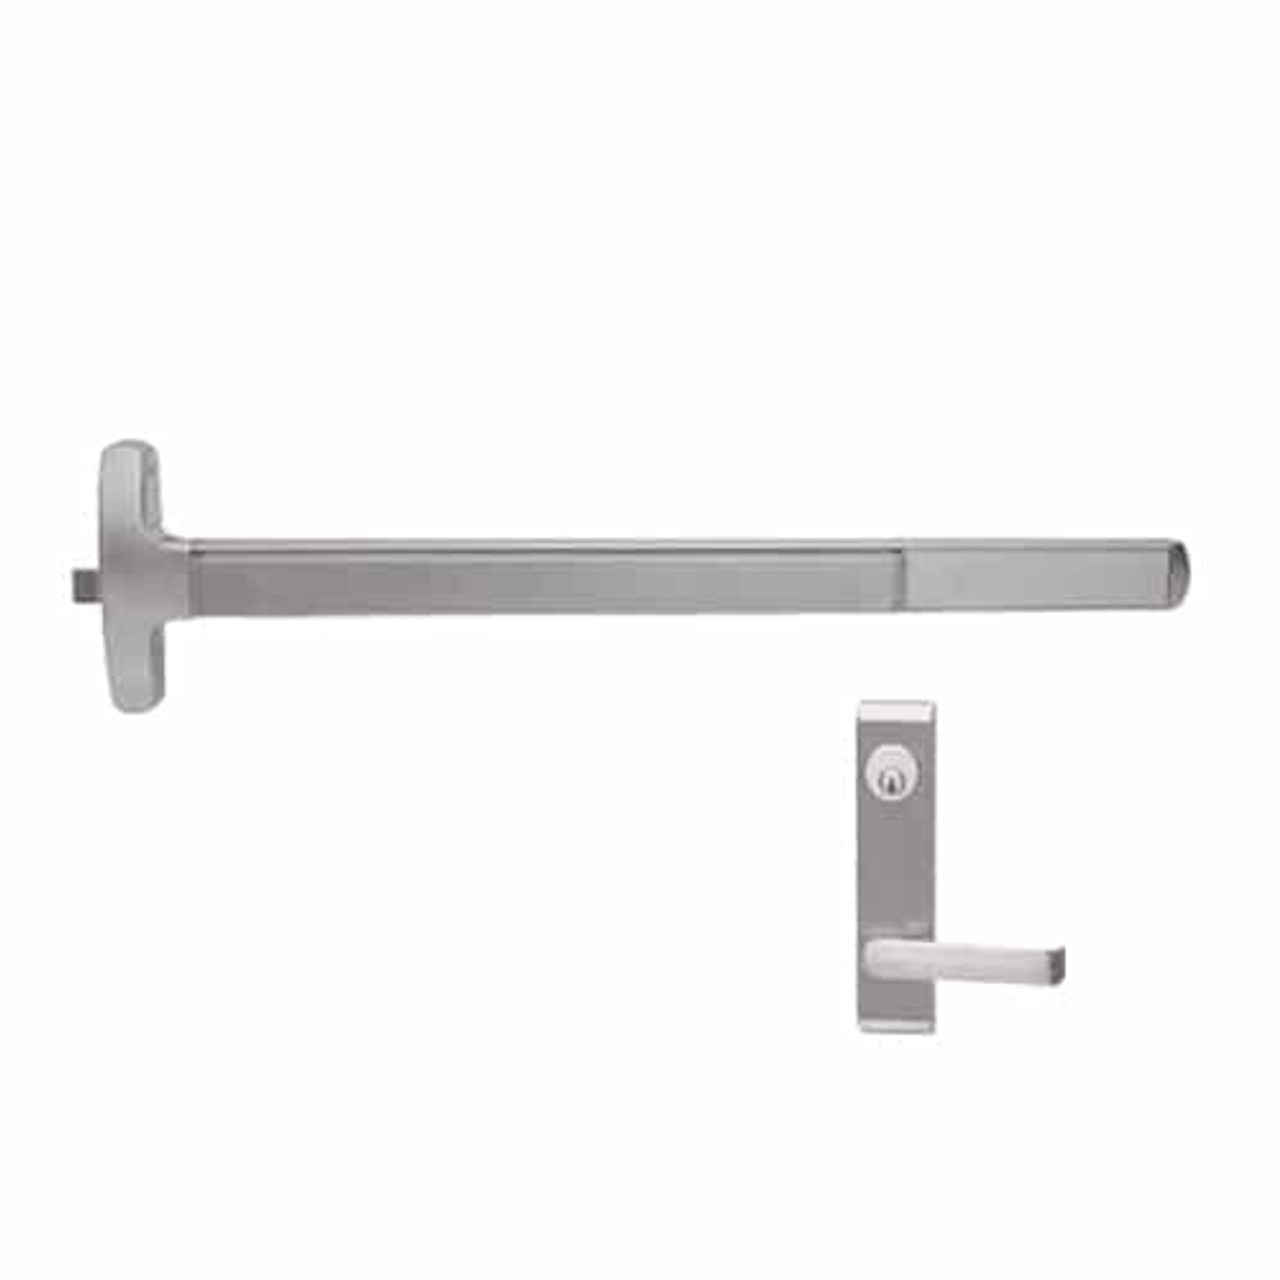 F-24-R-L-NL-DANE-US32D-4-RHR Falcon Exit Device in Satin Stainless Steel